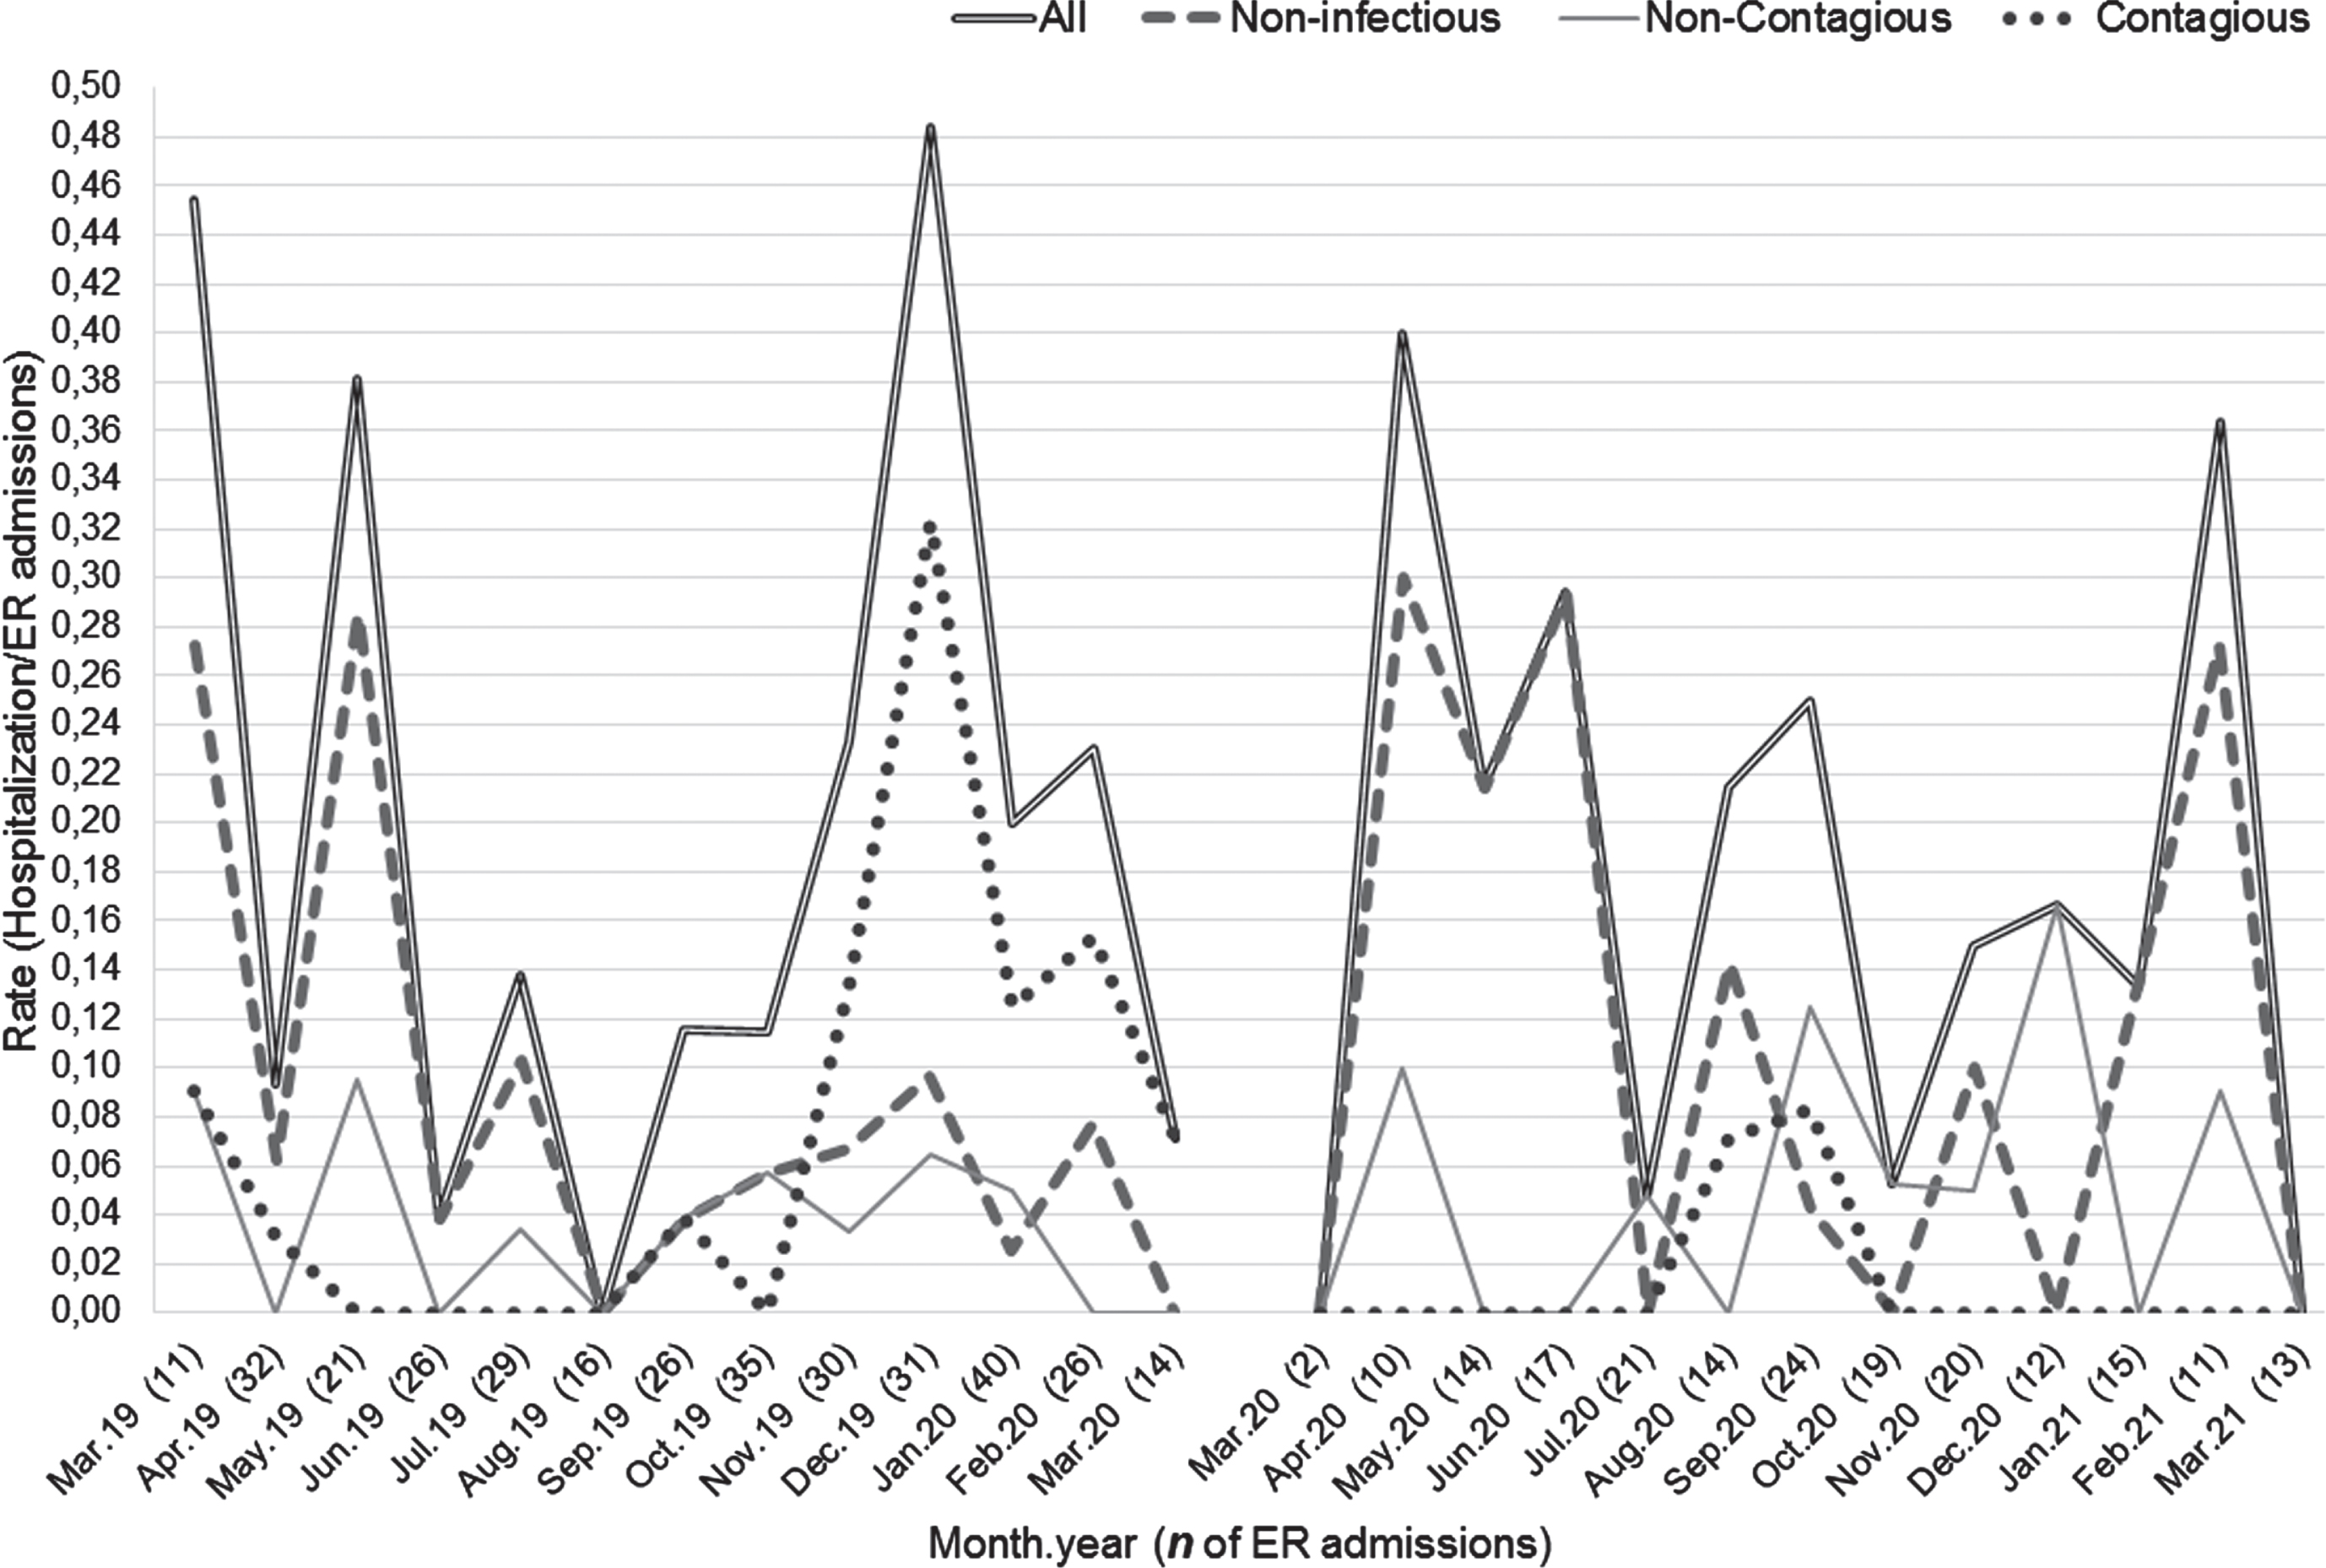 Lines plot showing rates for total hospitalizations and for each category. Monthly raw numbers of total admissions are shown, by month, on the x-axis (inside parentheses). Abbreviations: ER, Emergency Room; Jan, January; Feb, February; Mar, March; Apr, April; Jun, June; Jul, July; Aug, August; Sep, September; Oct, October; Nov, November; Dec, December.